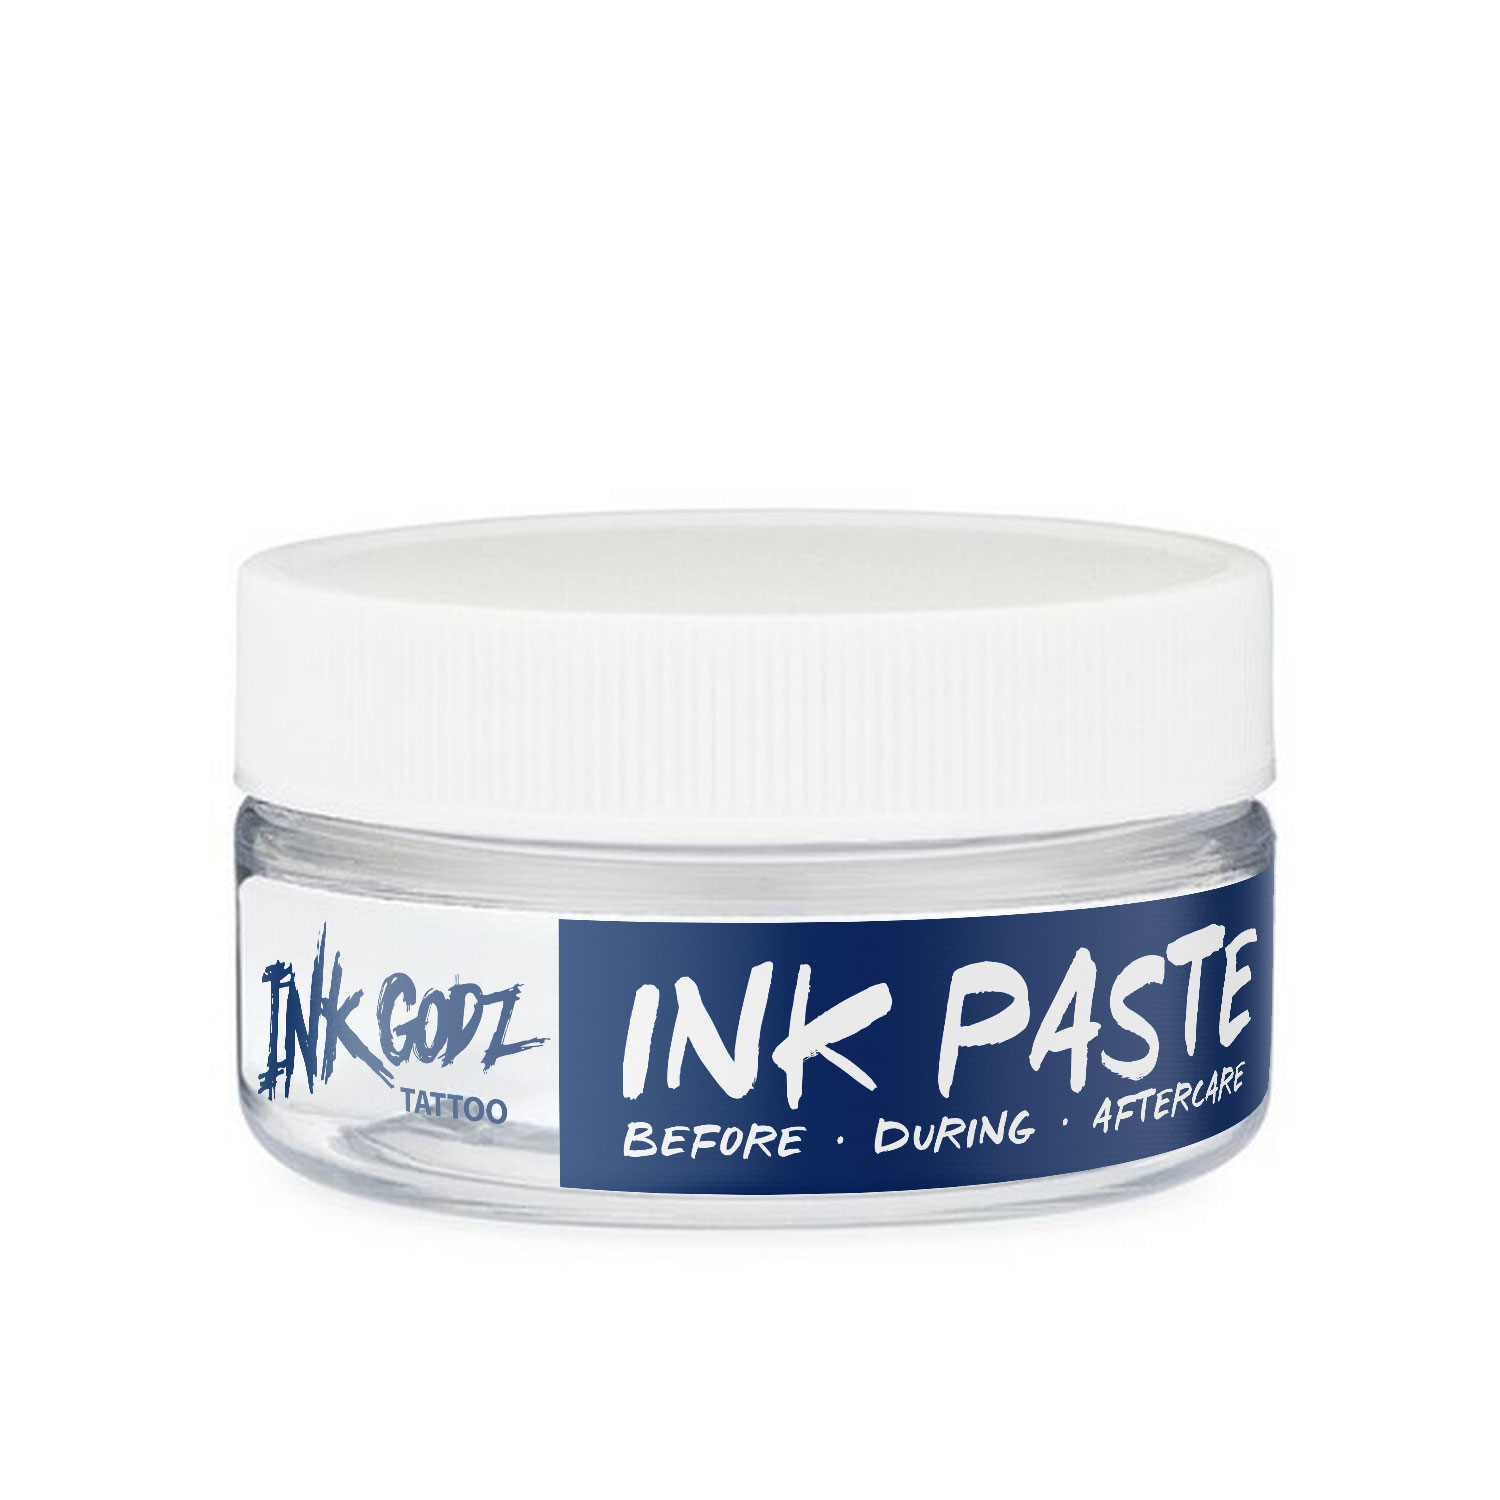 Ink Paste Tattoo Aftercare